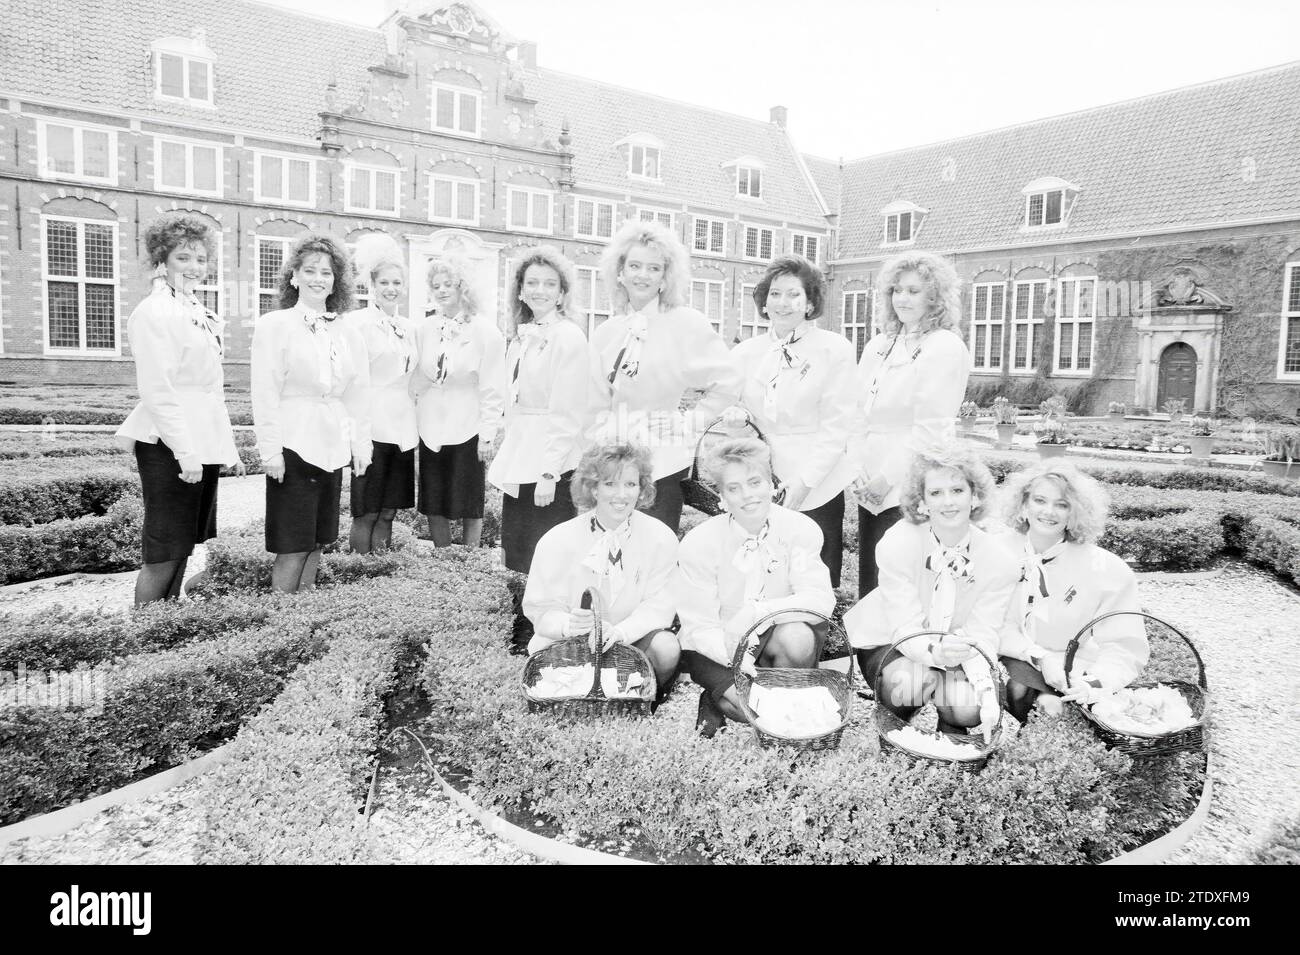 Presentation of flower girls at the Frans Hals museum, dressed by Frans Molenaar who is also in the group photo in the courtyard., Flowers and flower girls, Haarlem, Groot Heiligland 62, The Netherlands, 23-03-1988, Whizgle News from the Past, Tailored for the Future. Explore historical narratives, Dutch The Netherlands agency image with a modern perspective, bridging the gap between yesterday's events and tomorrow's insights. A timeless journey shaping the stories that shape our future. Stock Photo